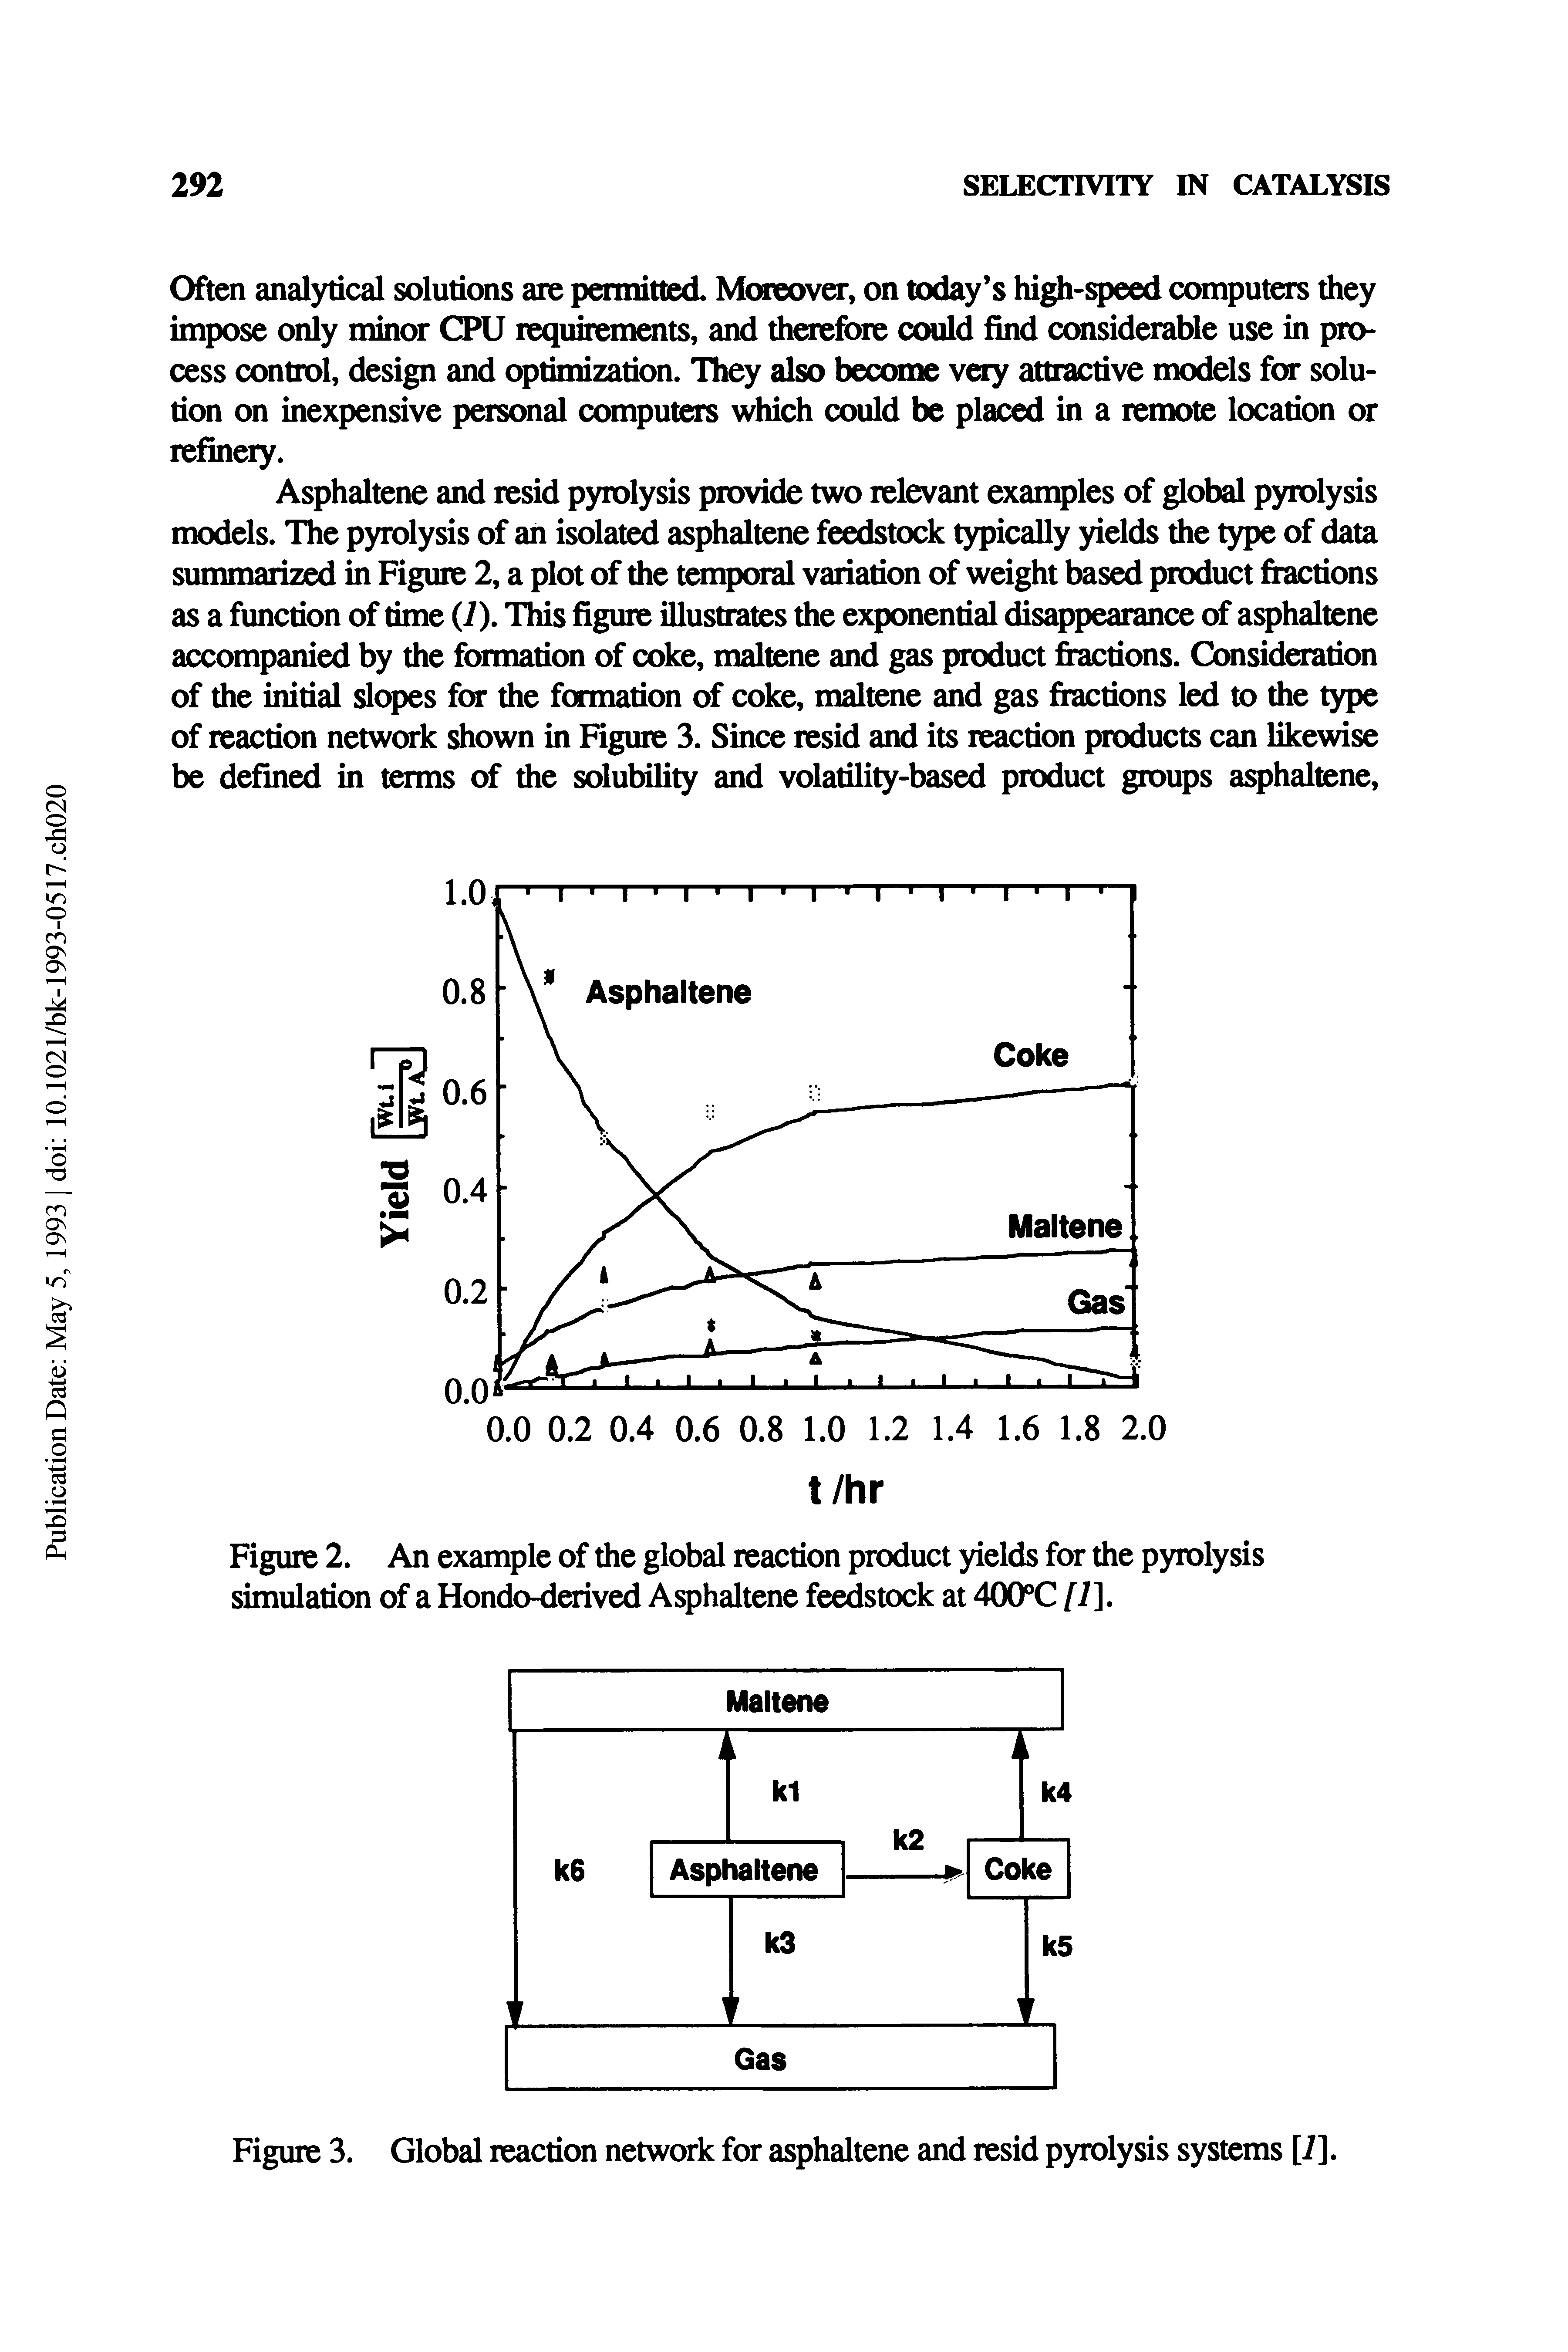 Figure 3. Global reaction network for asphaltene and resid pyrolysis systems [7].